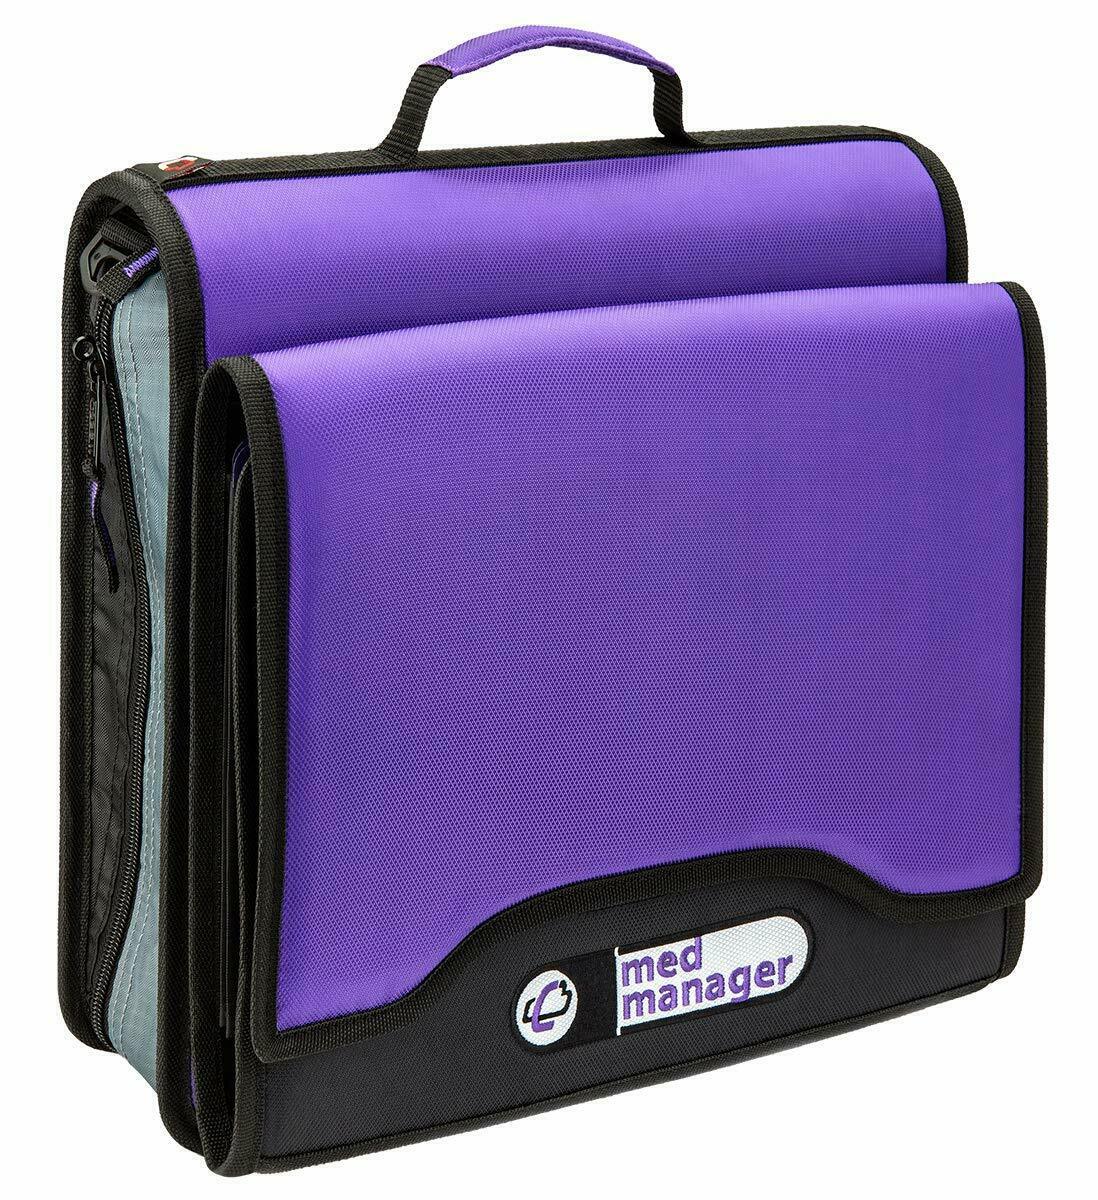 Med Manager Diabetic Supply Organizer With Insulin Cooler Travel Case, Purple